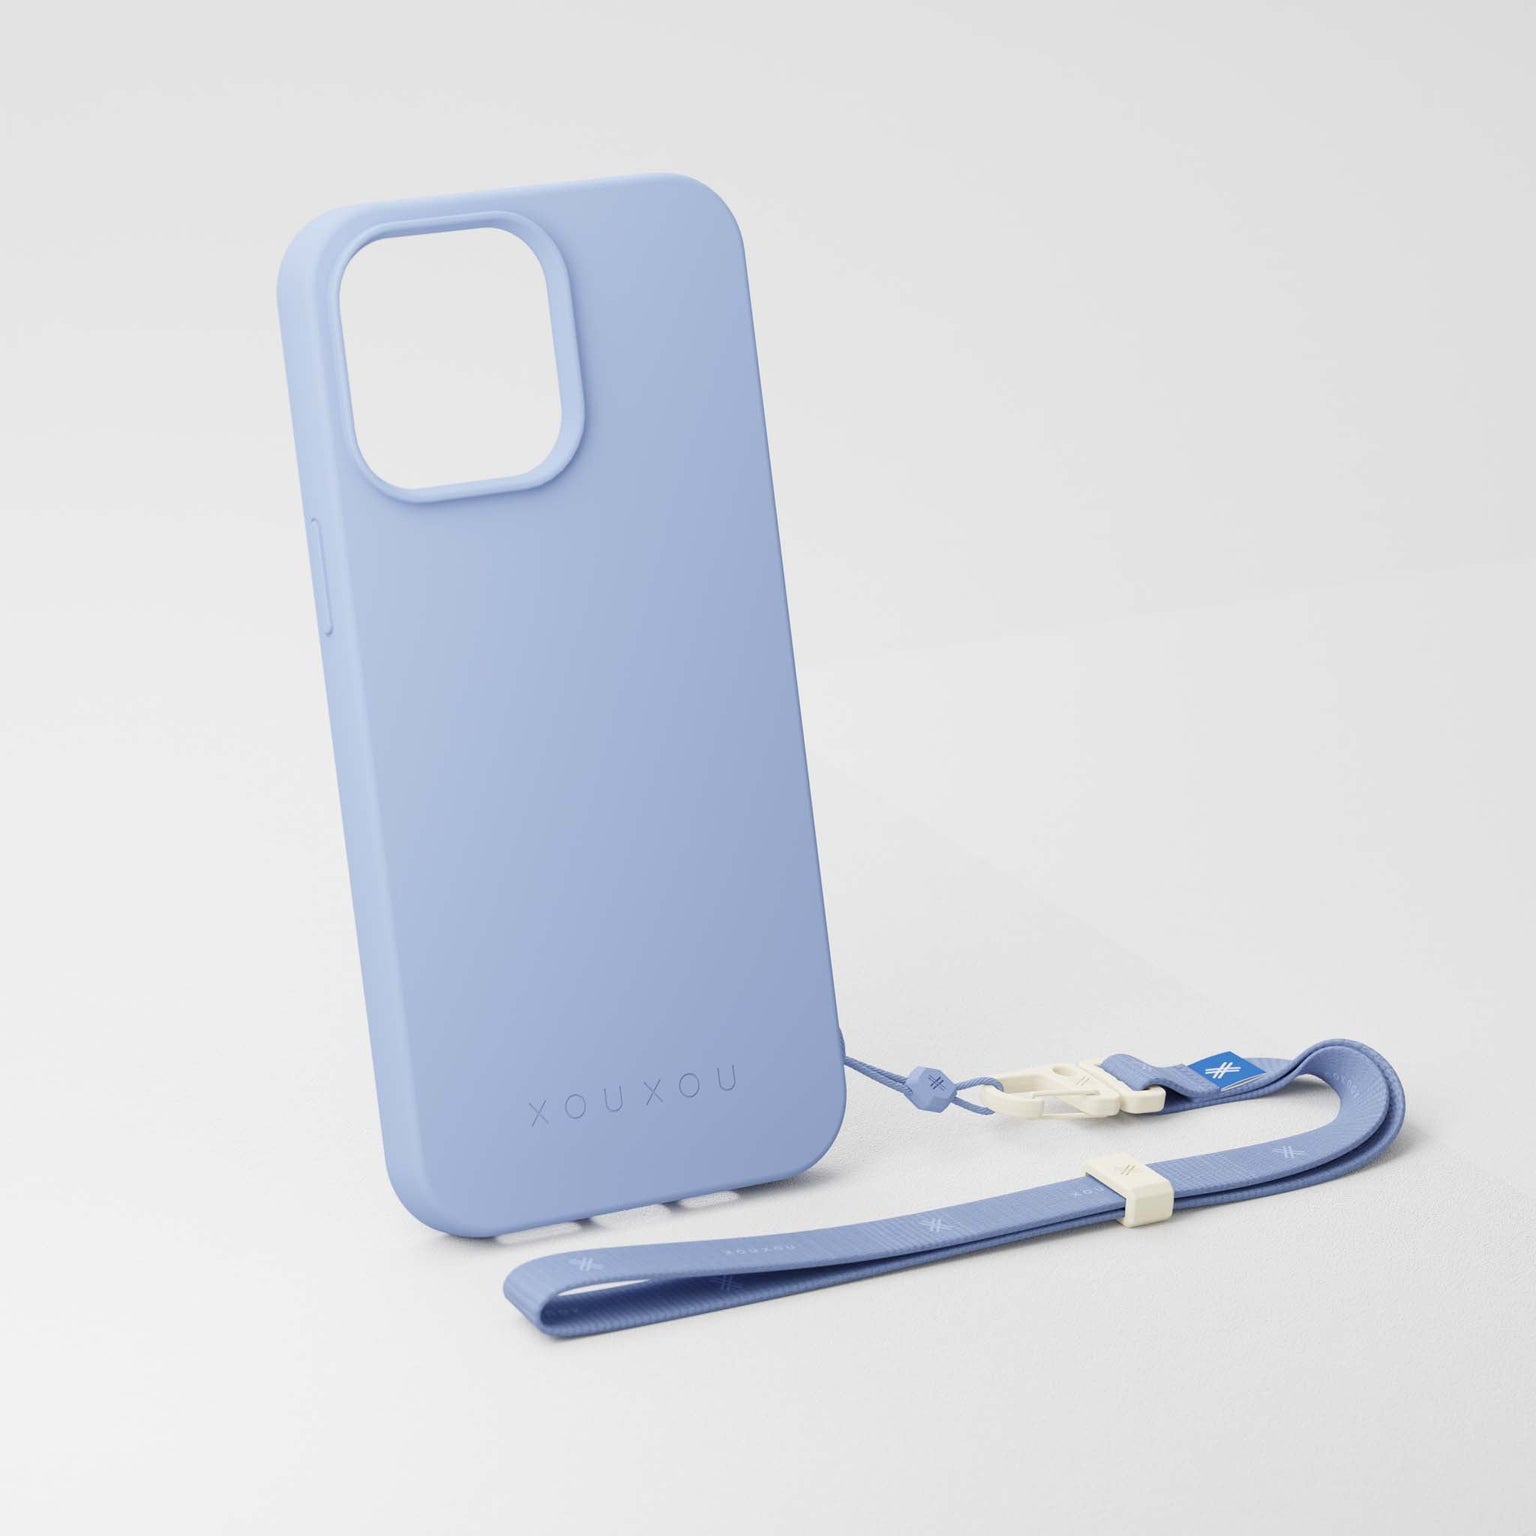 iPhone Case Baby Blue with Wrist Strap | XOUXOU